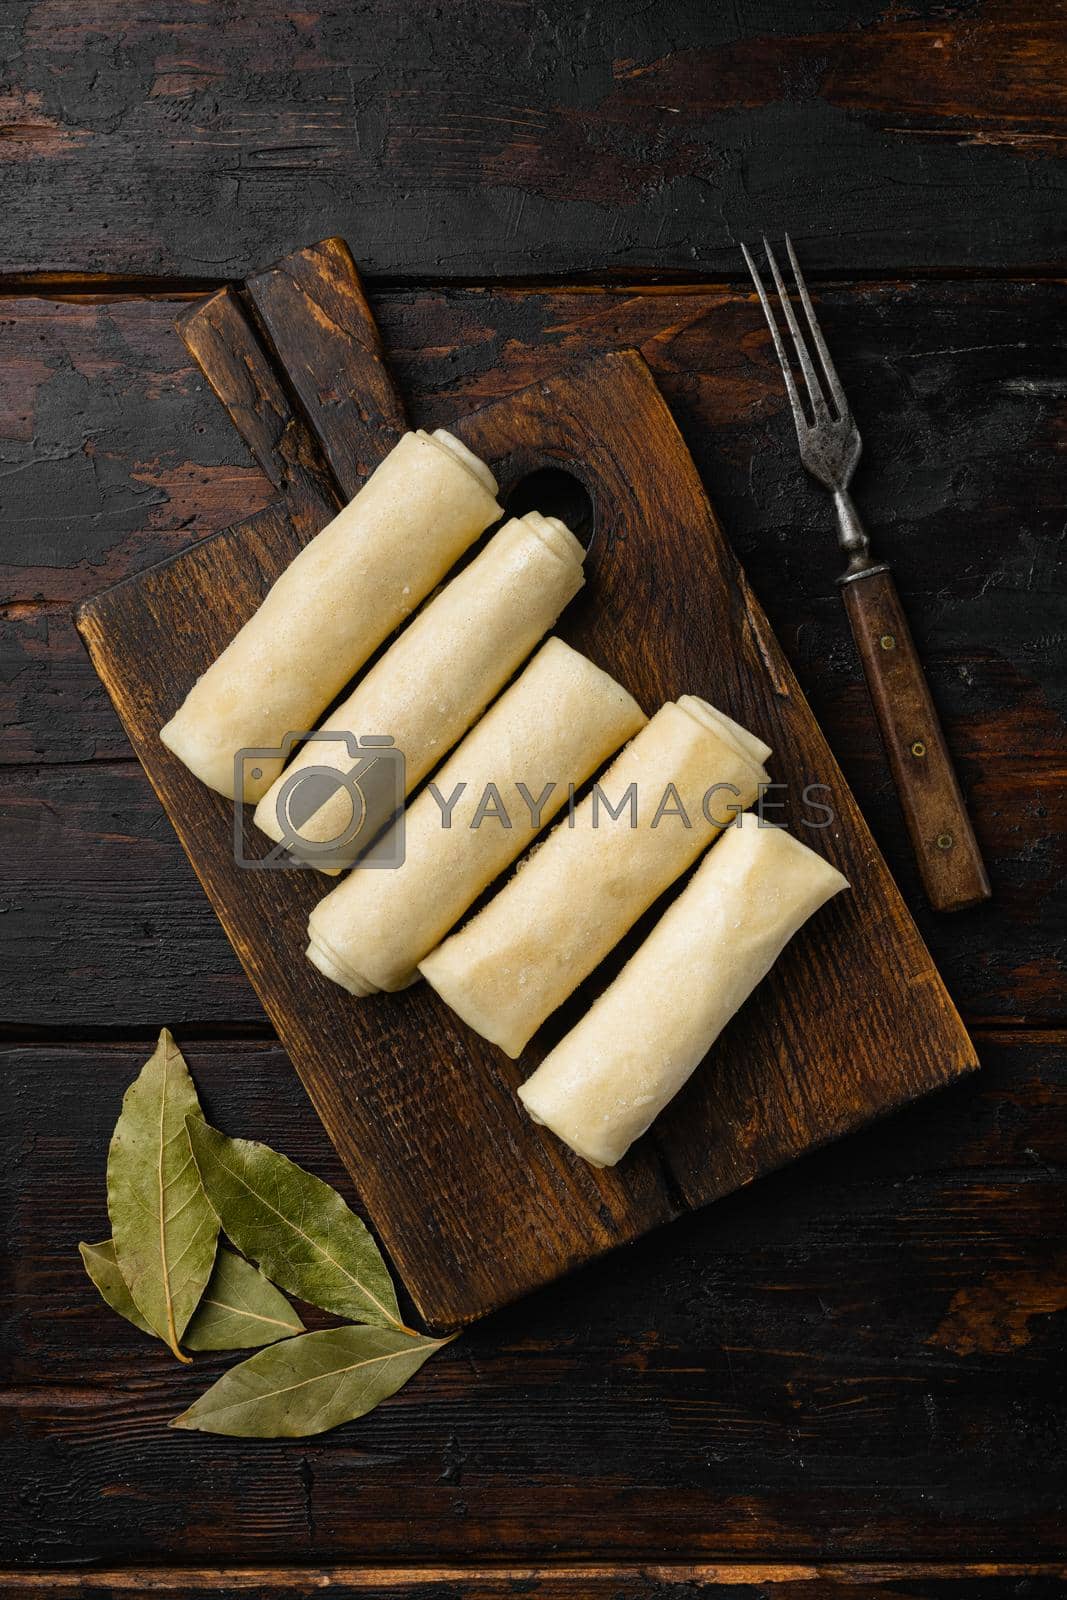 Royalty free image of Crepes frozen on old dark wooden table background, top view flat lay by Ilianesolenyi